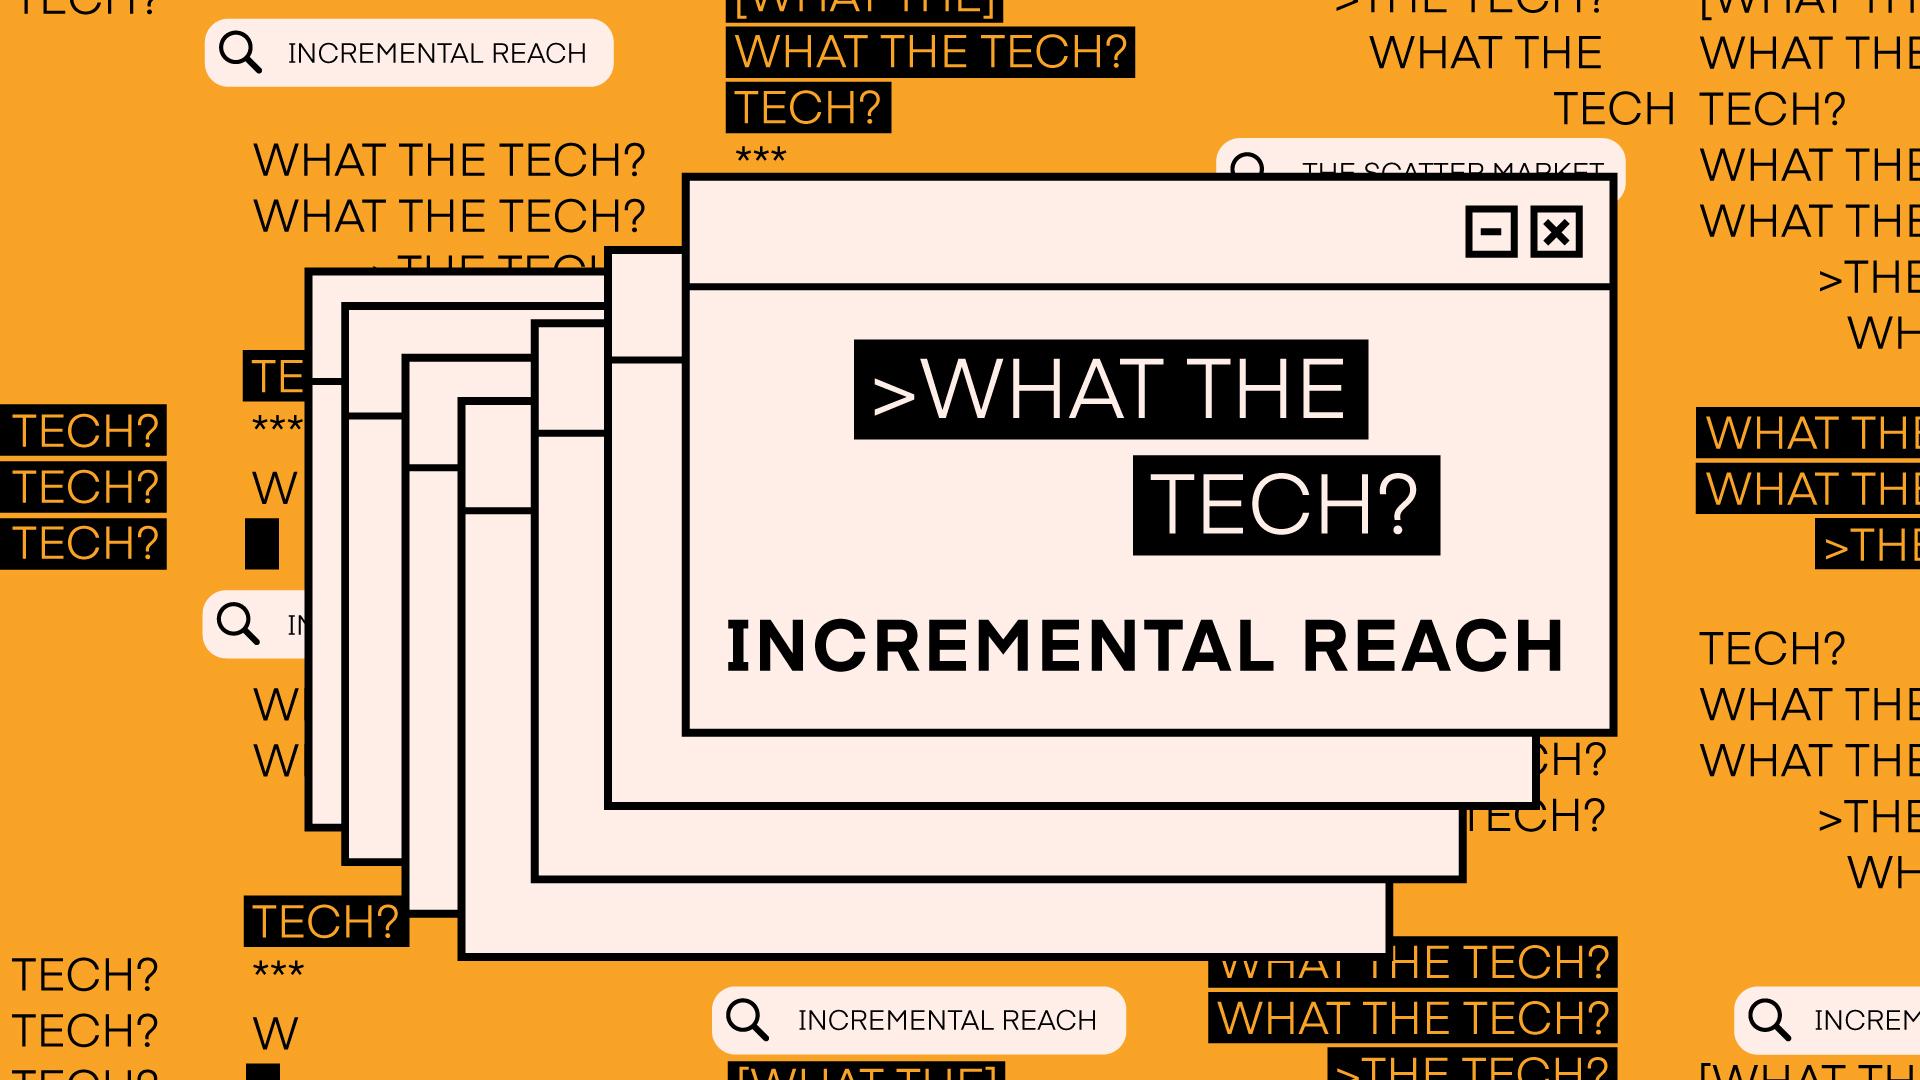 What the Tech is incremental reach?